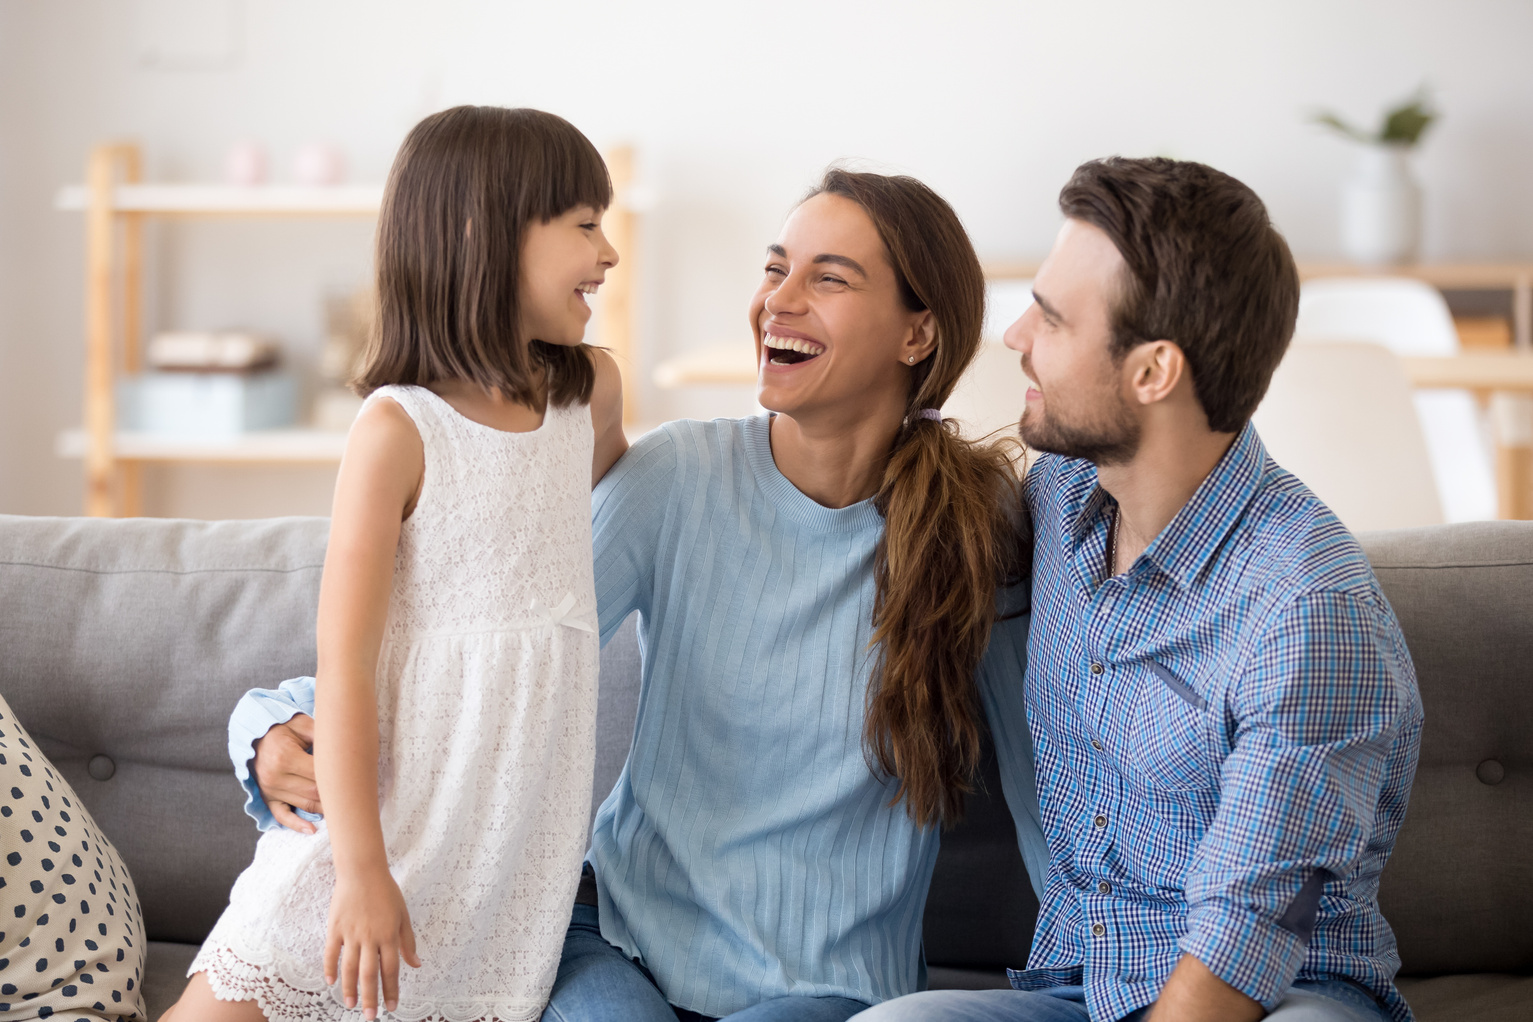 Kid daughter having fun talking to happy parents laughing together